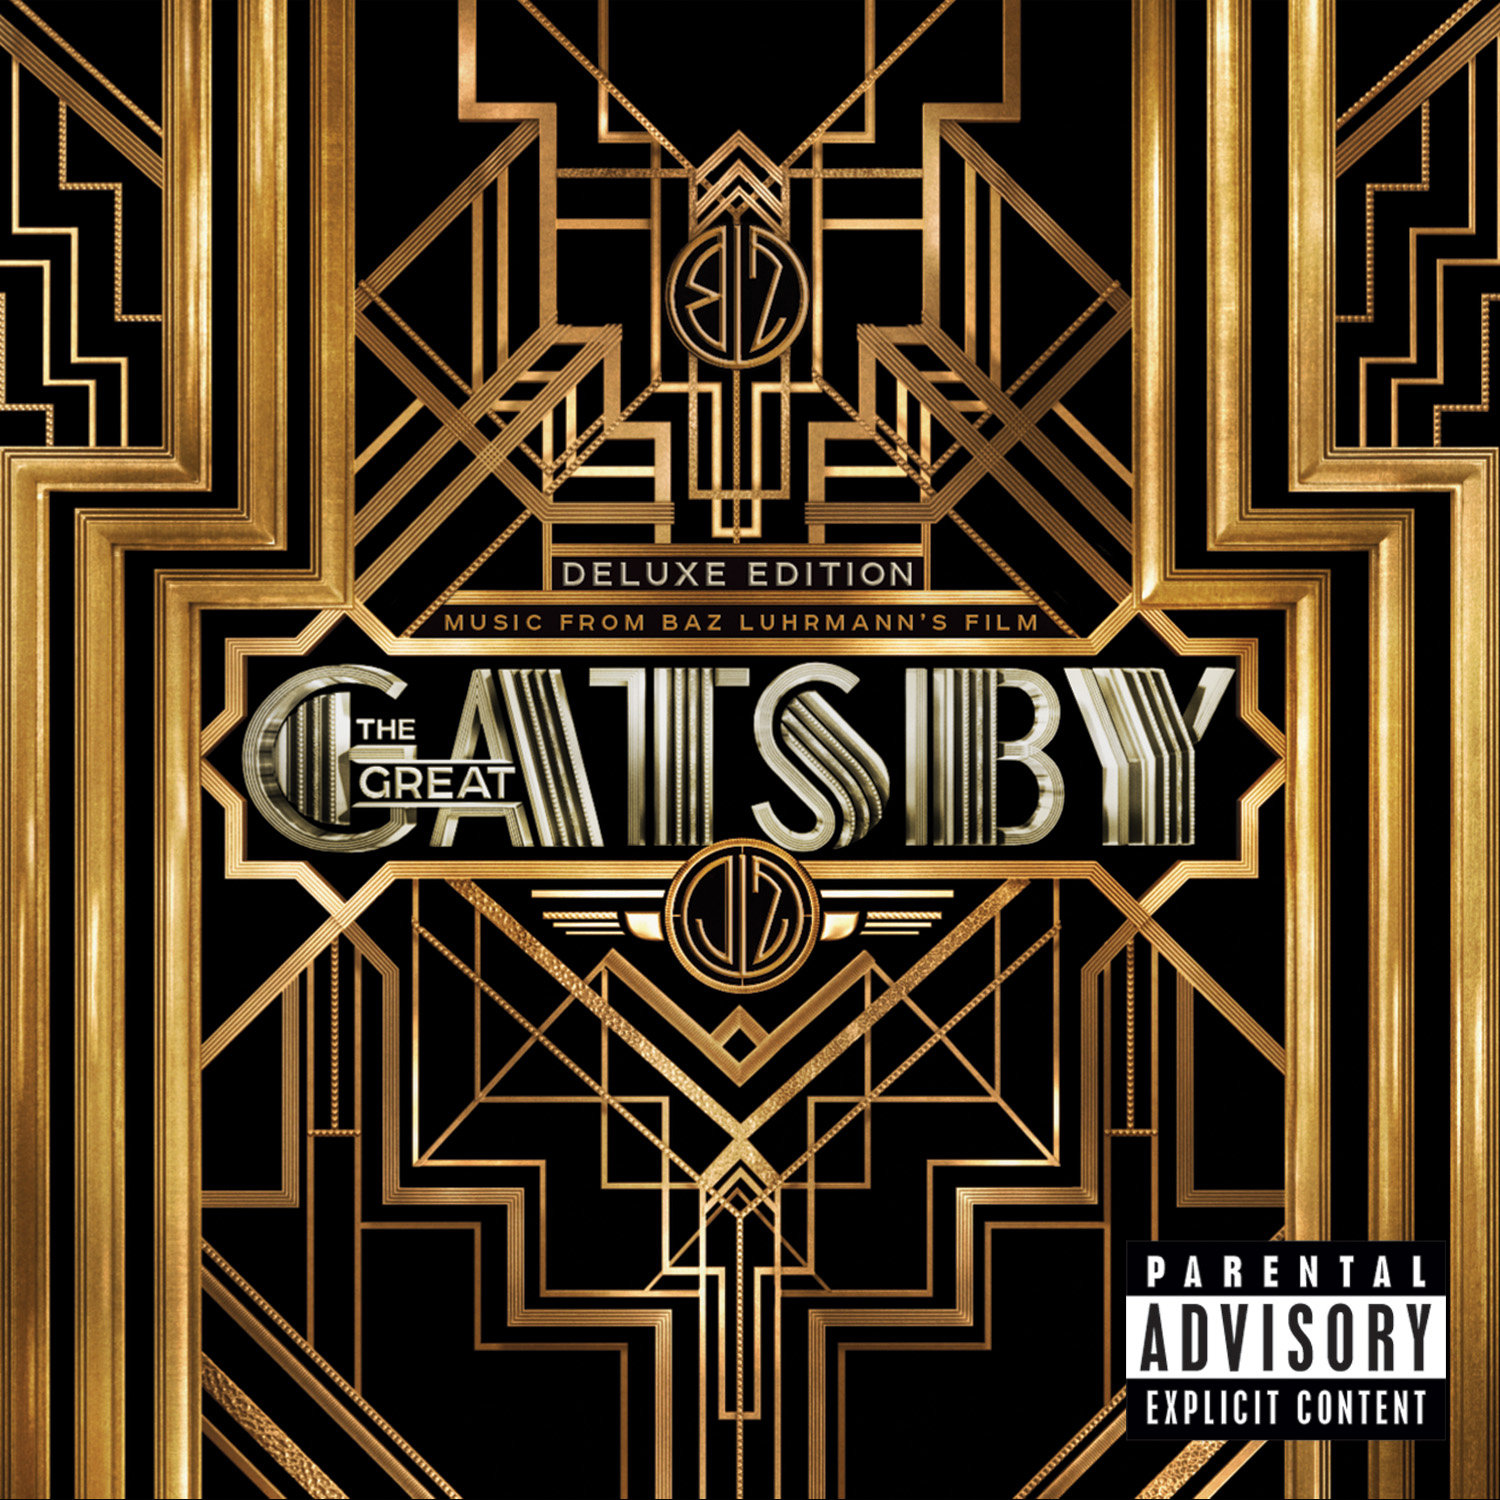 the great gatsby orchestral score torrent